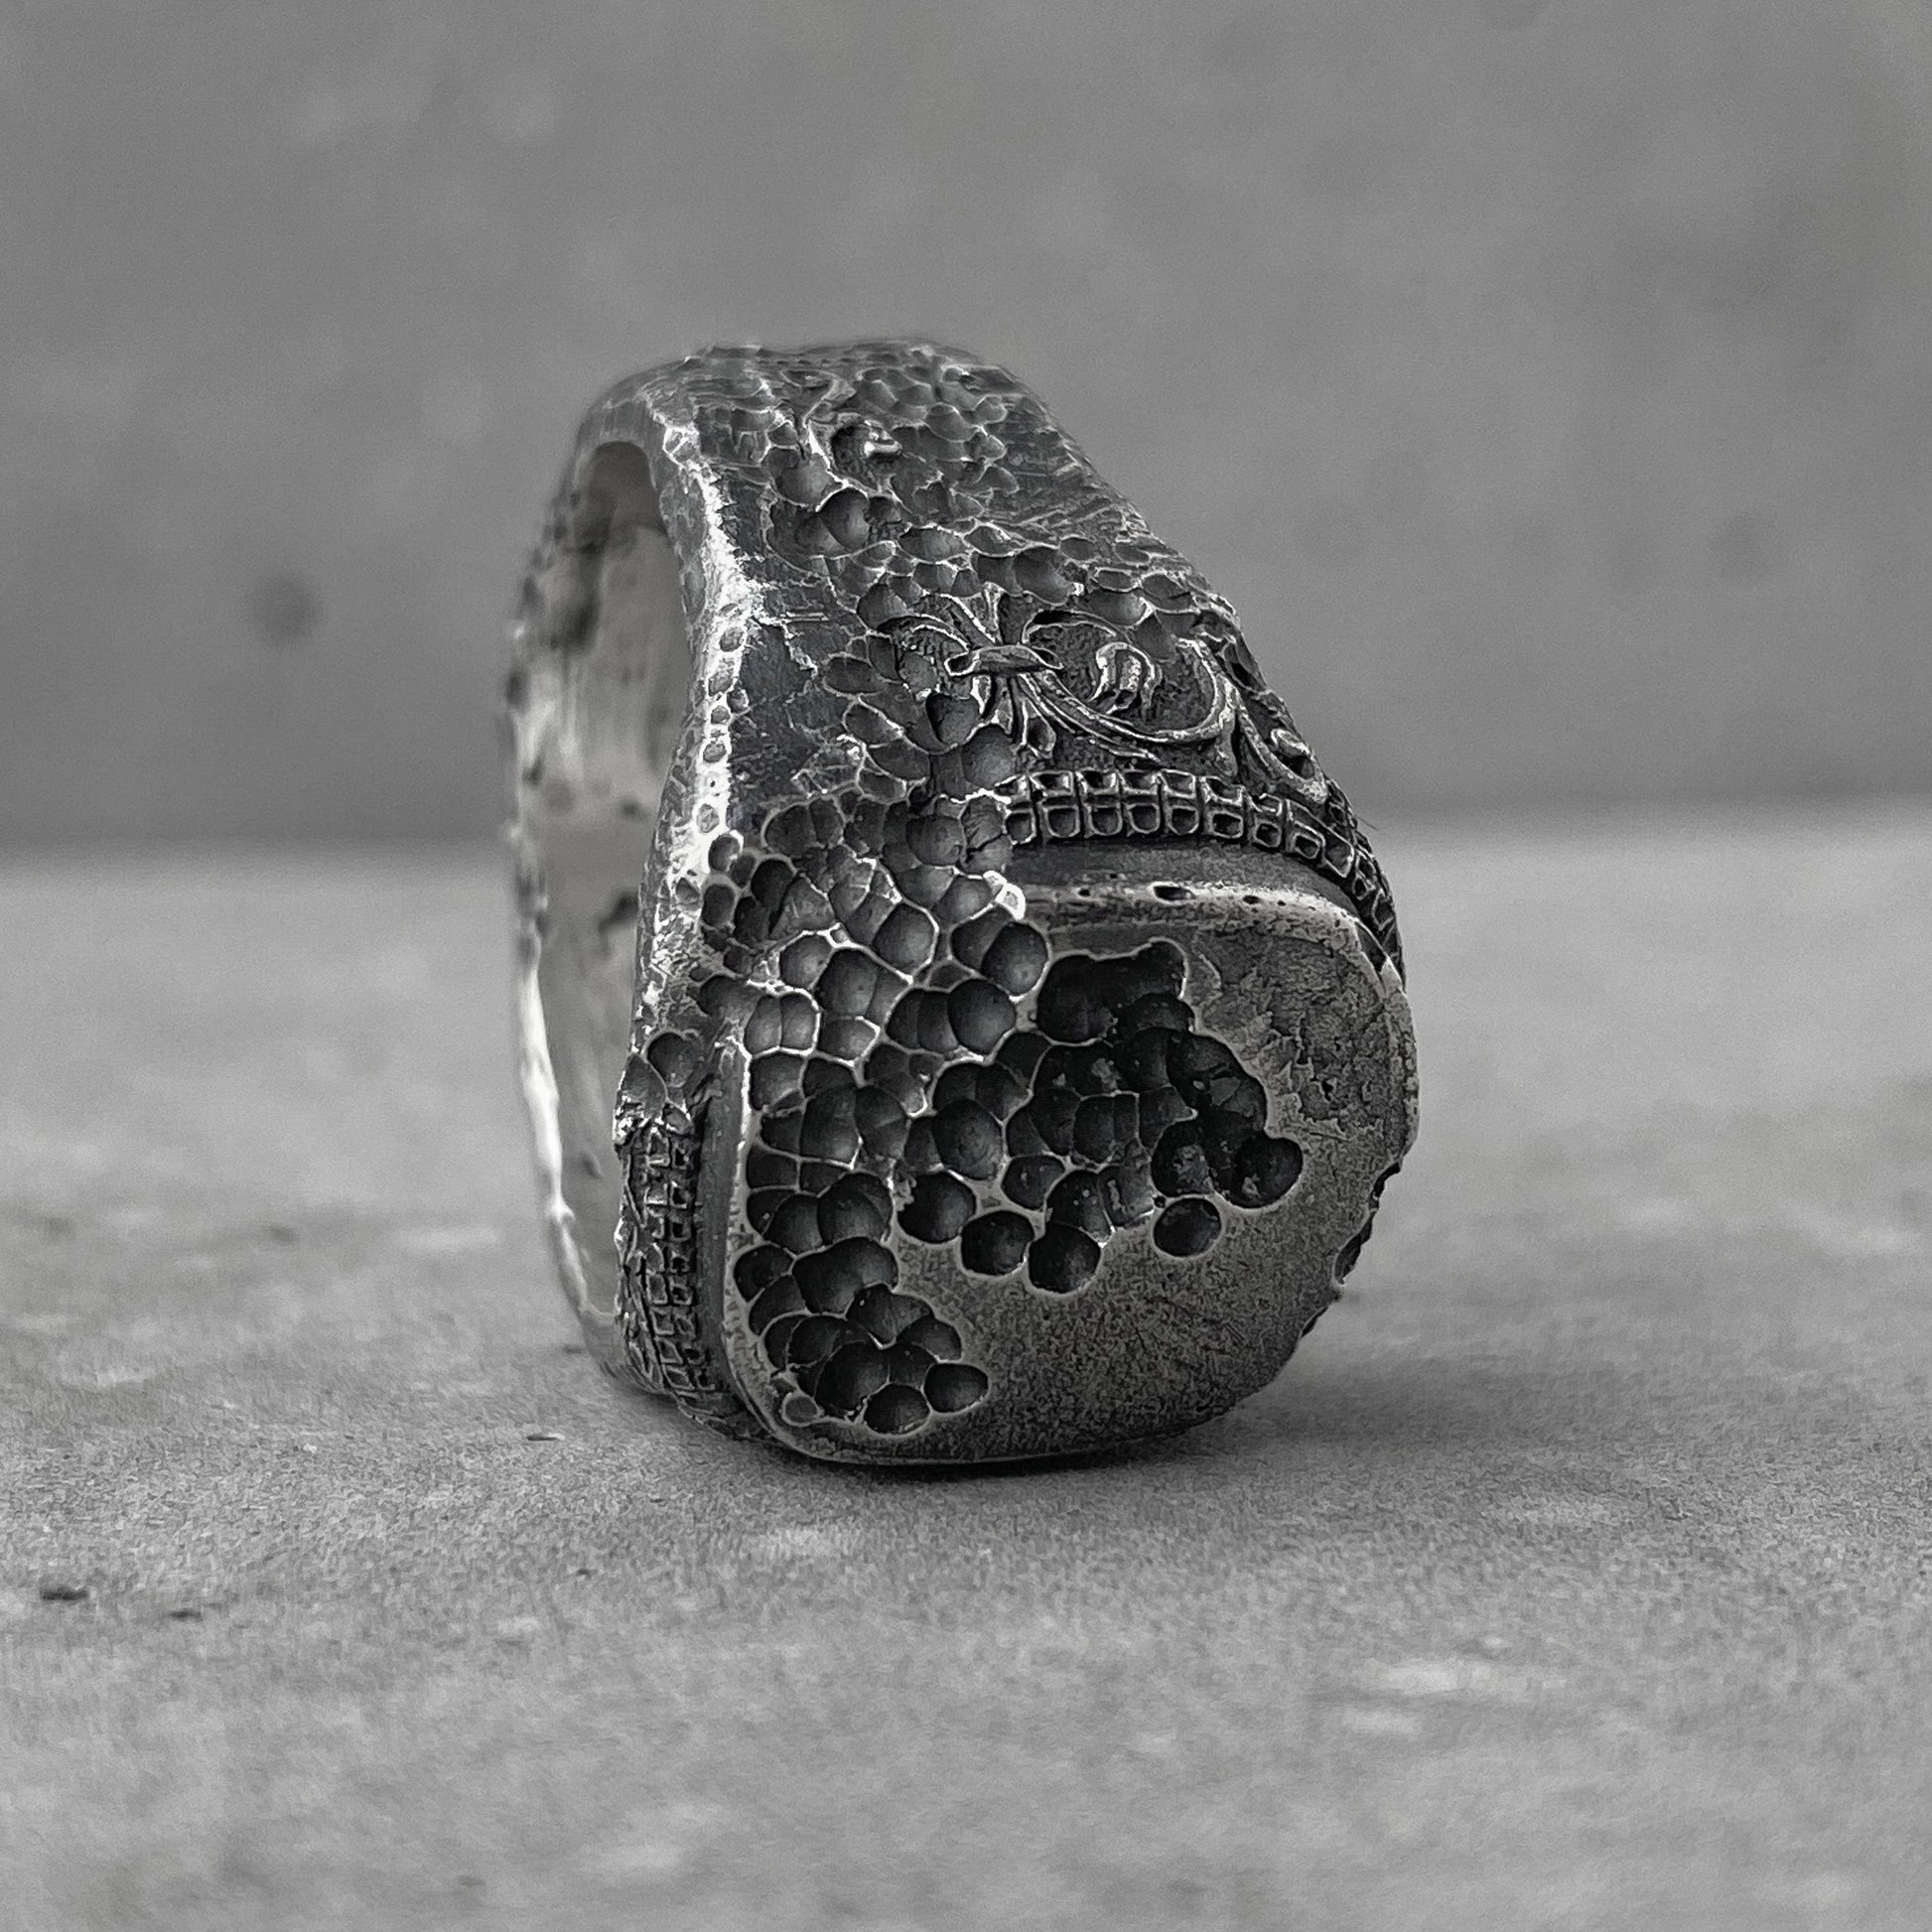 Gorgeous ring- brutal sterling ring with a destroyed pattern Unusual rings Project50g 